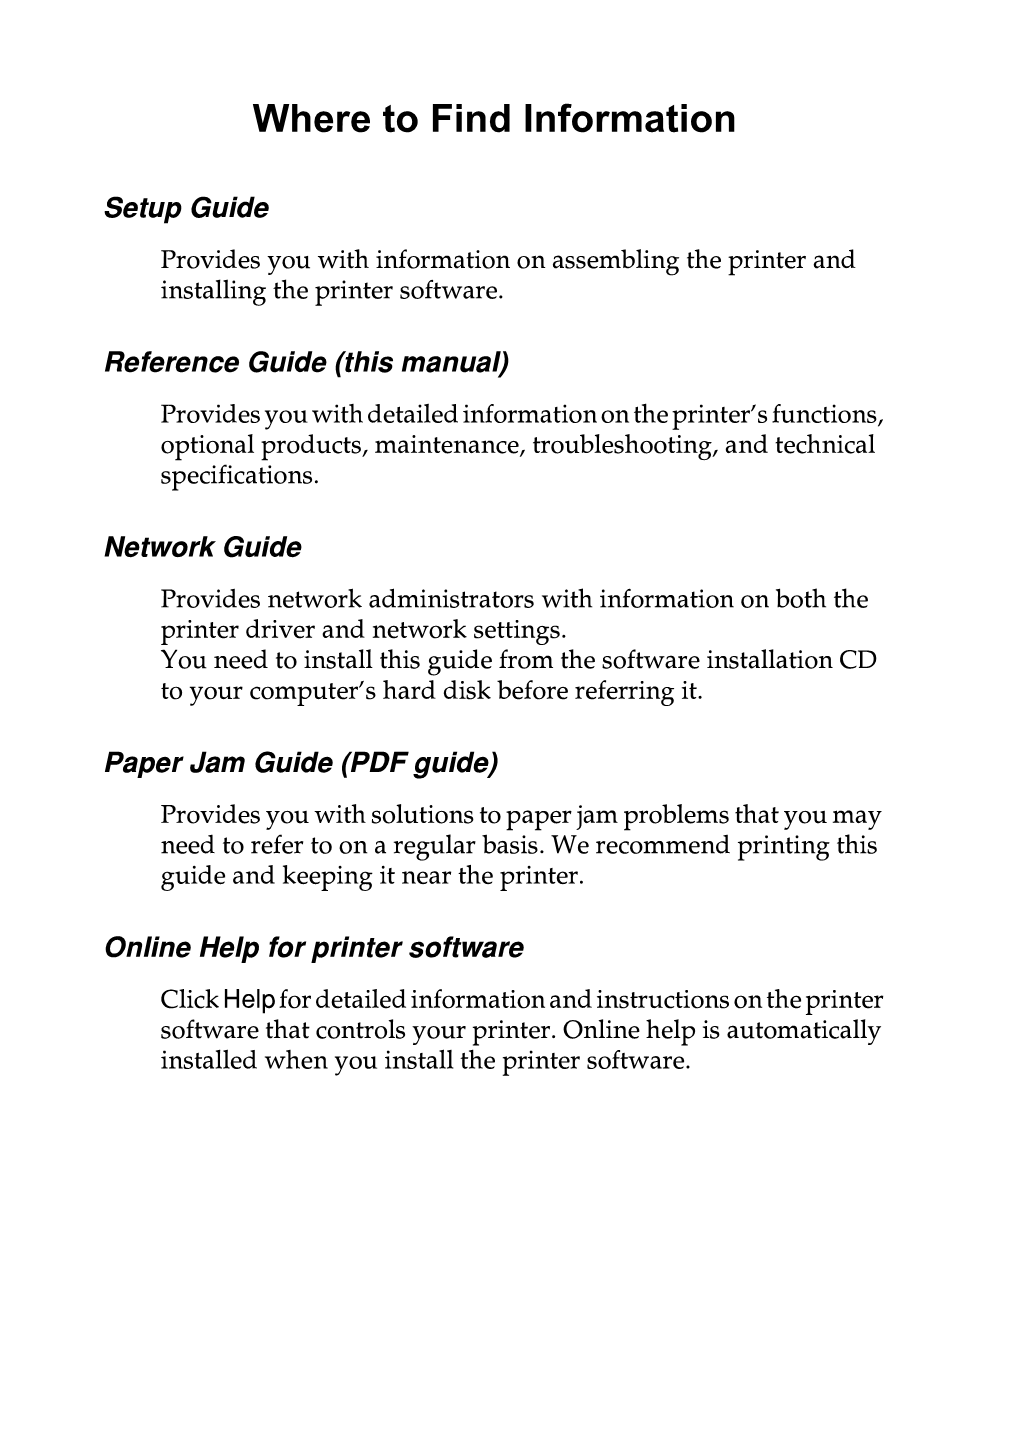 Printer and Installing the Printer Software